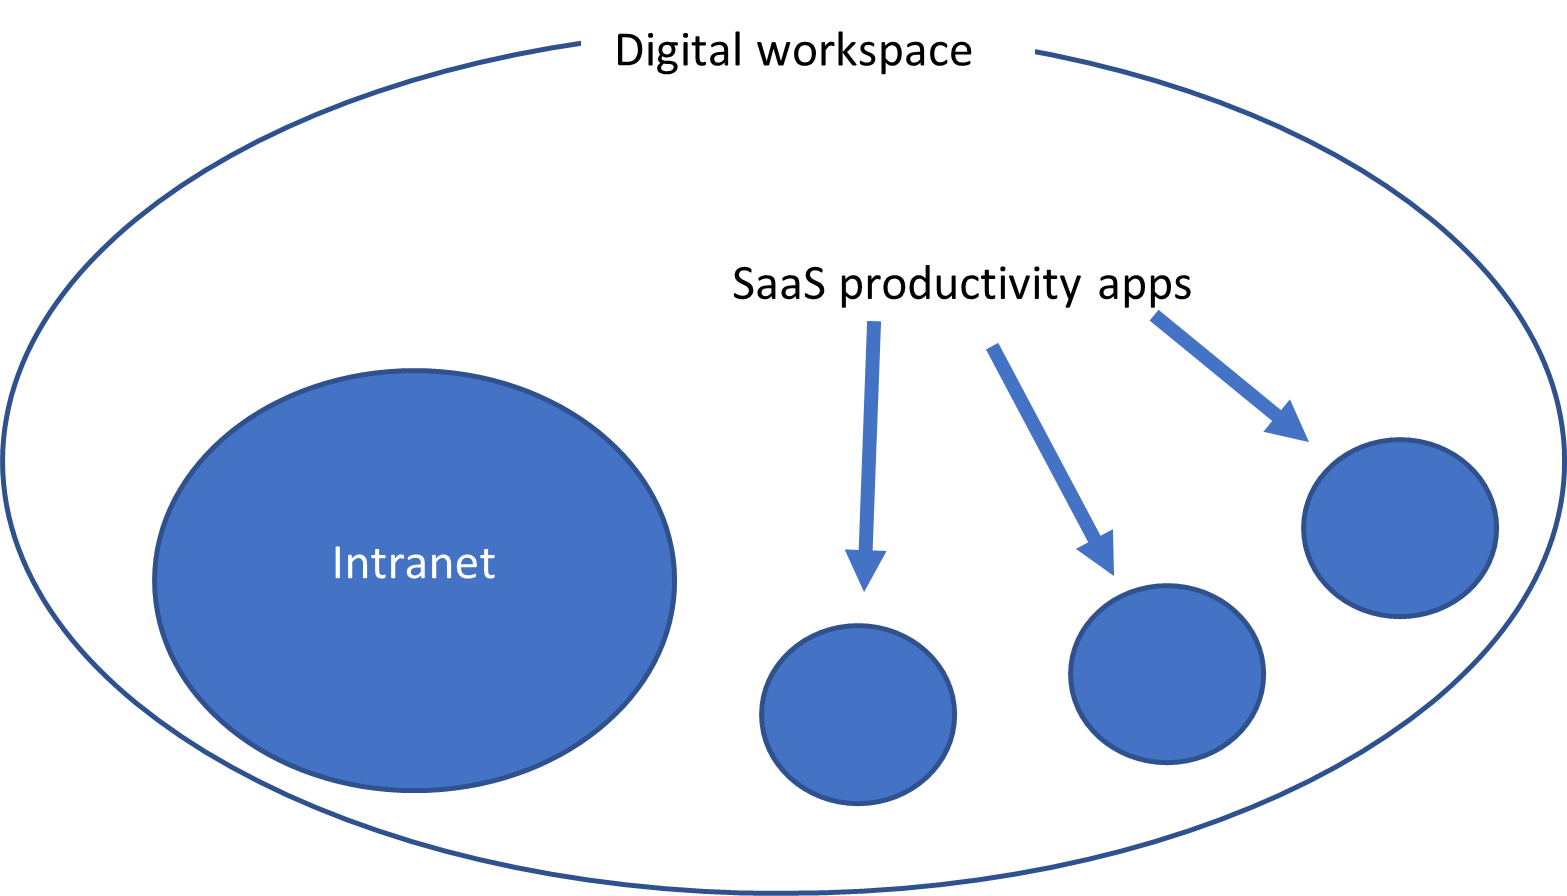 A diagram showing how an intranet sits within a digital workspace. The intranet sits alongside all productivity apps within the digital workspace.